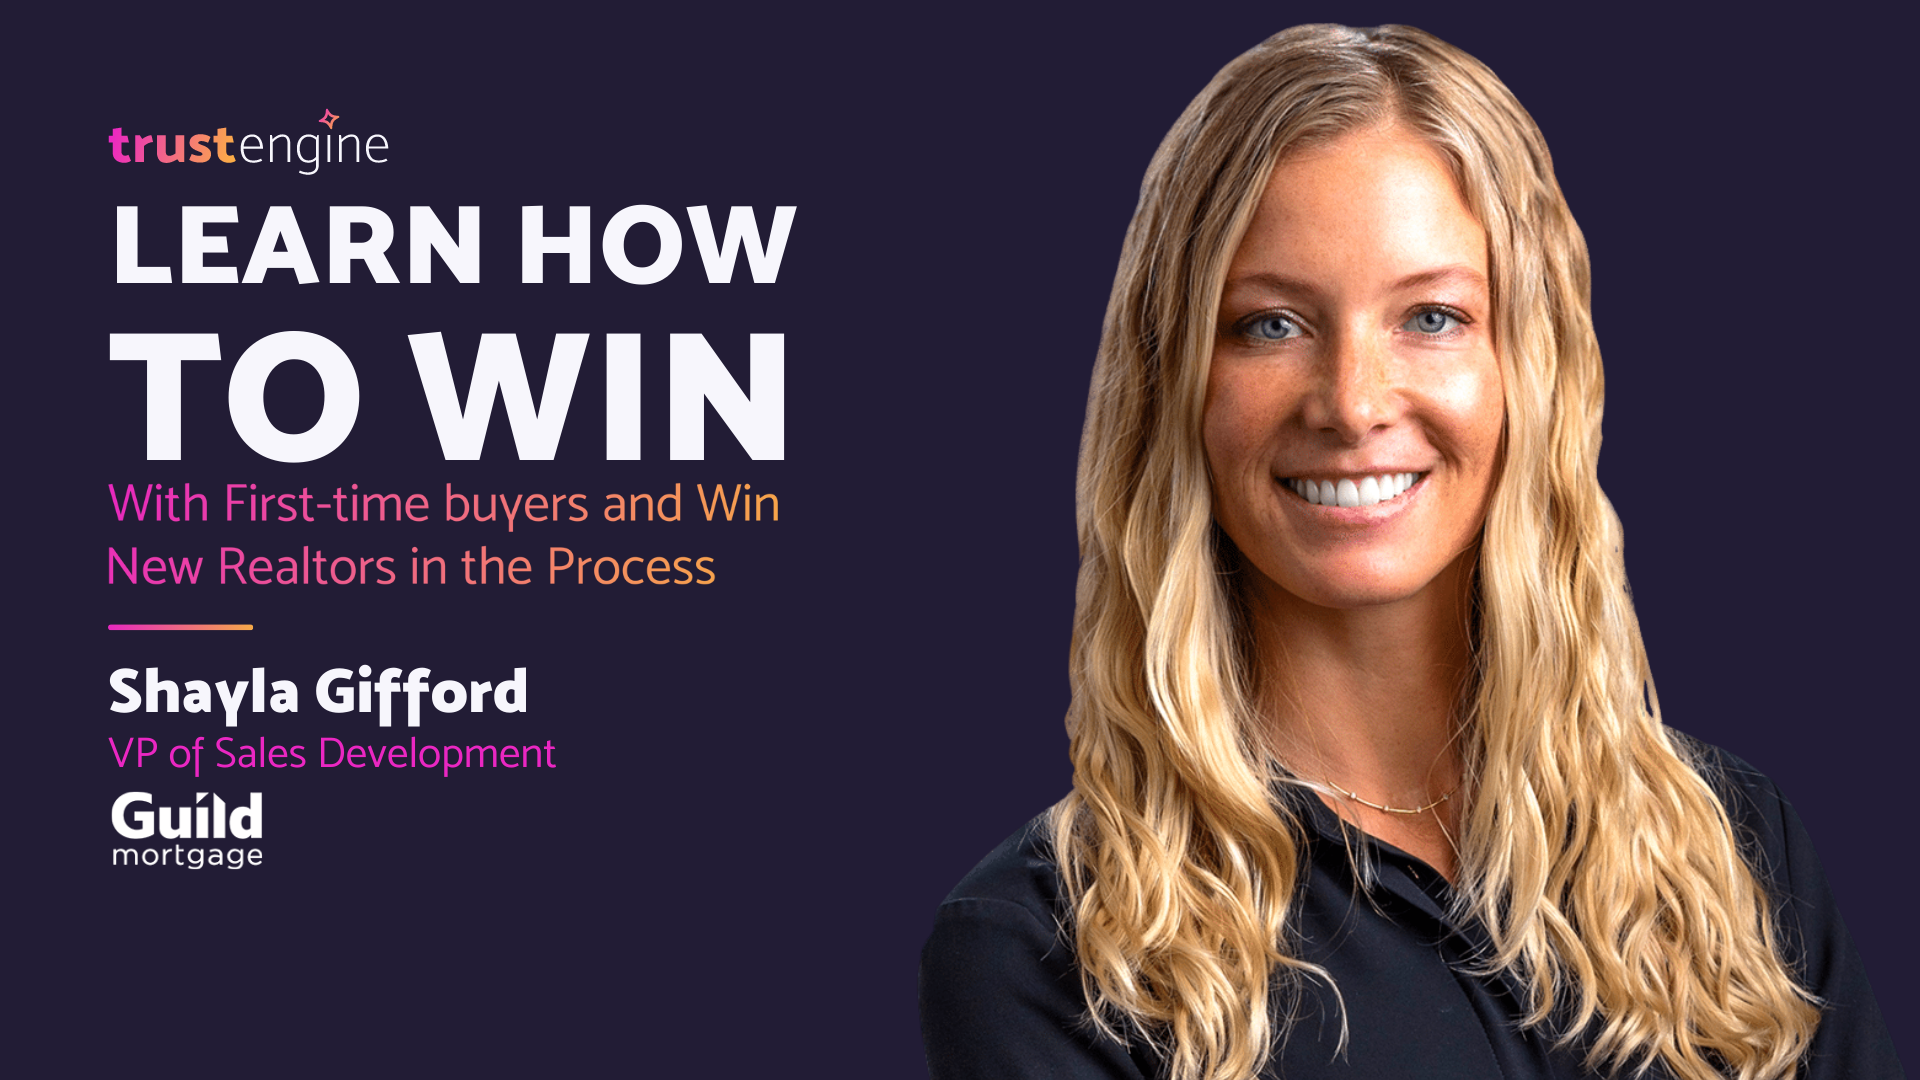 Learn How To Win with First-time buyers and Win New Realtors in the Process